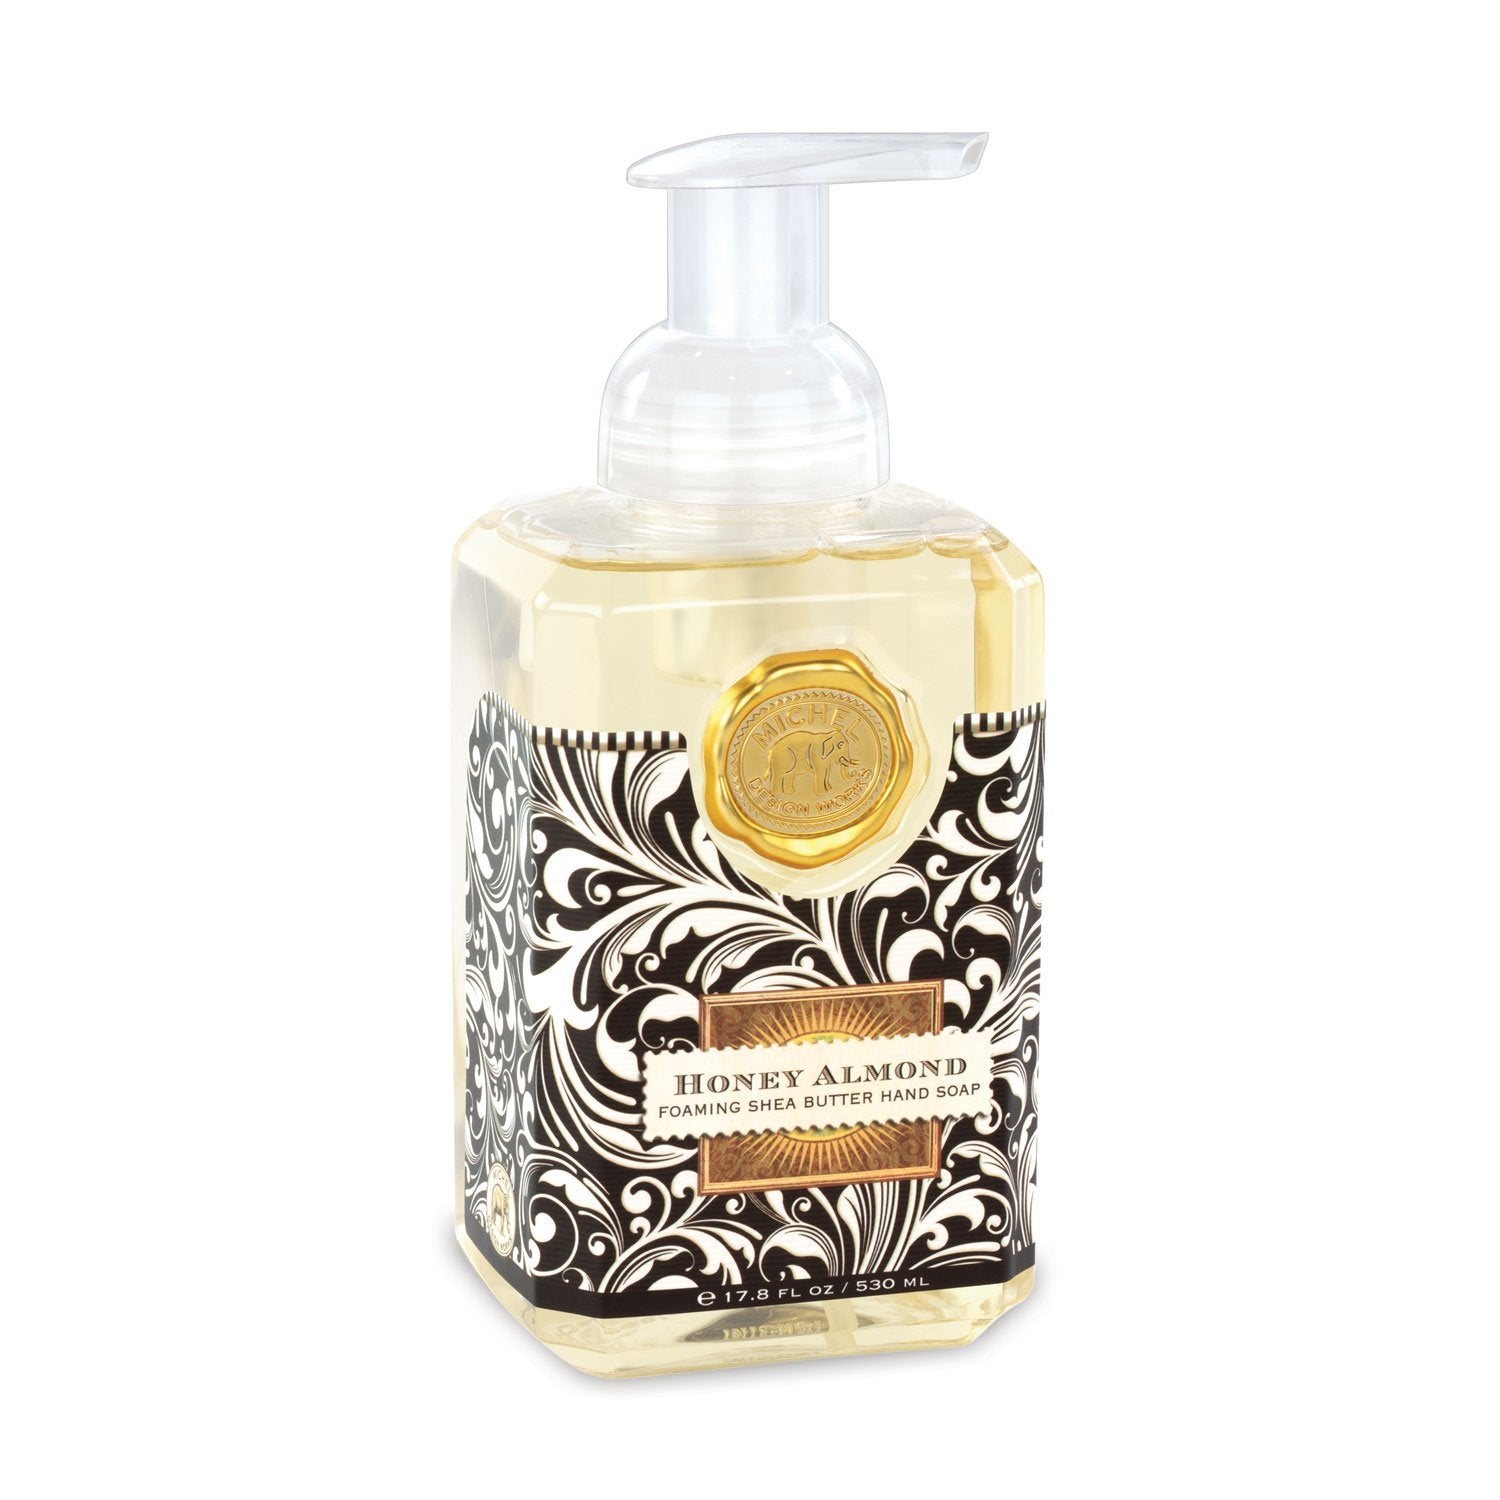 Foaming Hand Soap - Various Scents | Michel Design Works